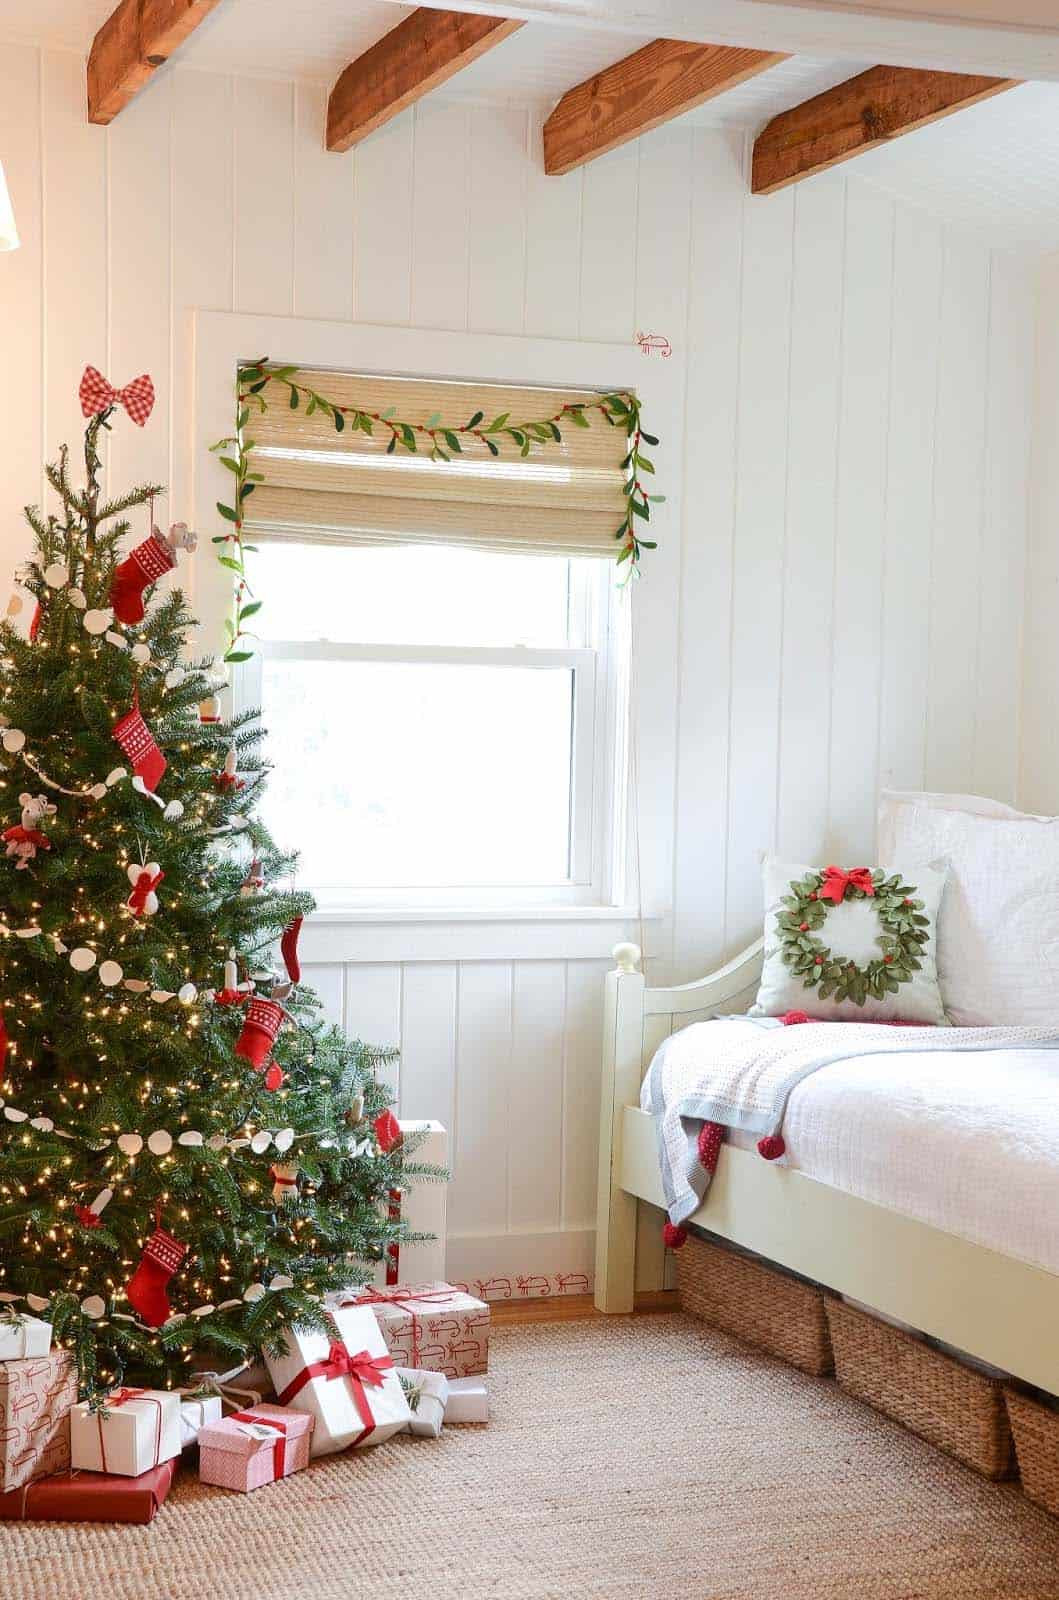 Christmas Decorated Bedroom
 35 Ways to create a Christmas wonderland in your bedroom